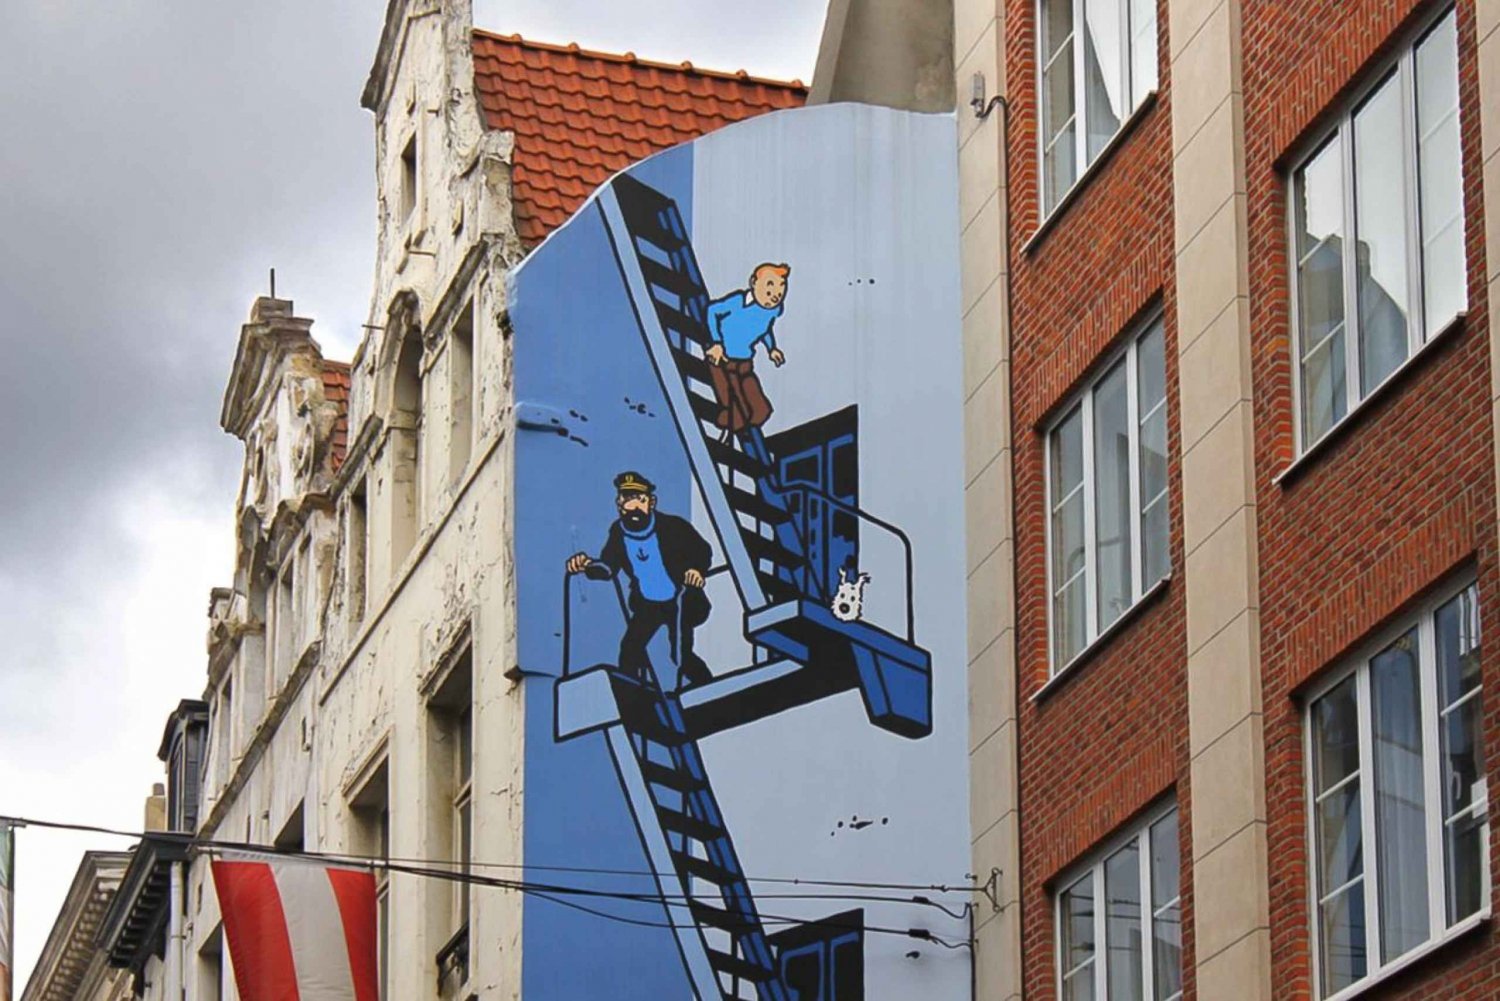 Brussels Land of Comics: Outdoor Escape Game